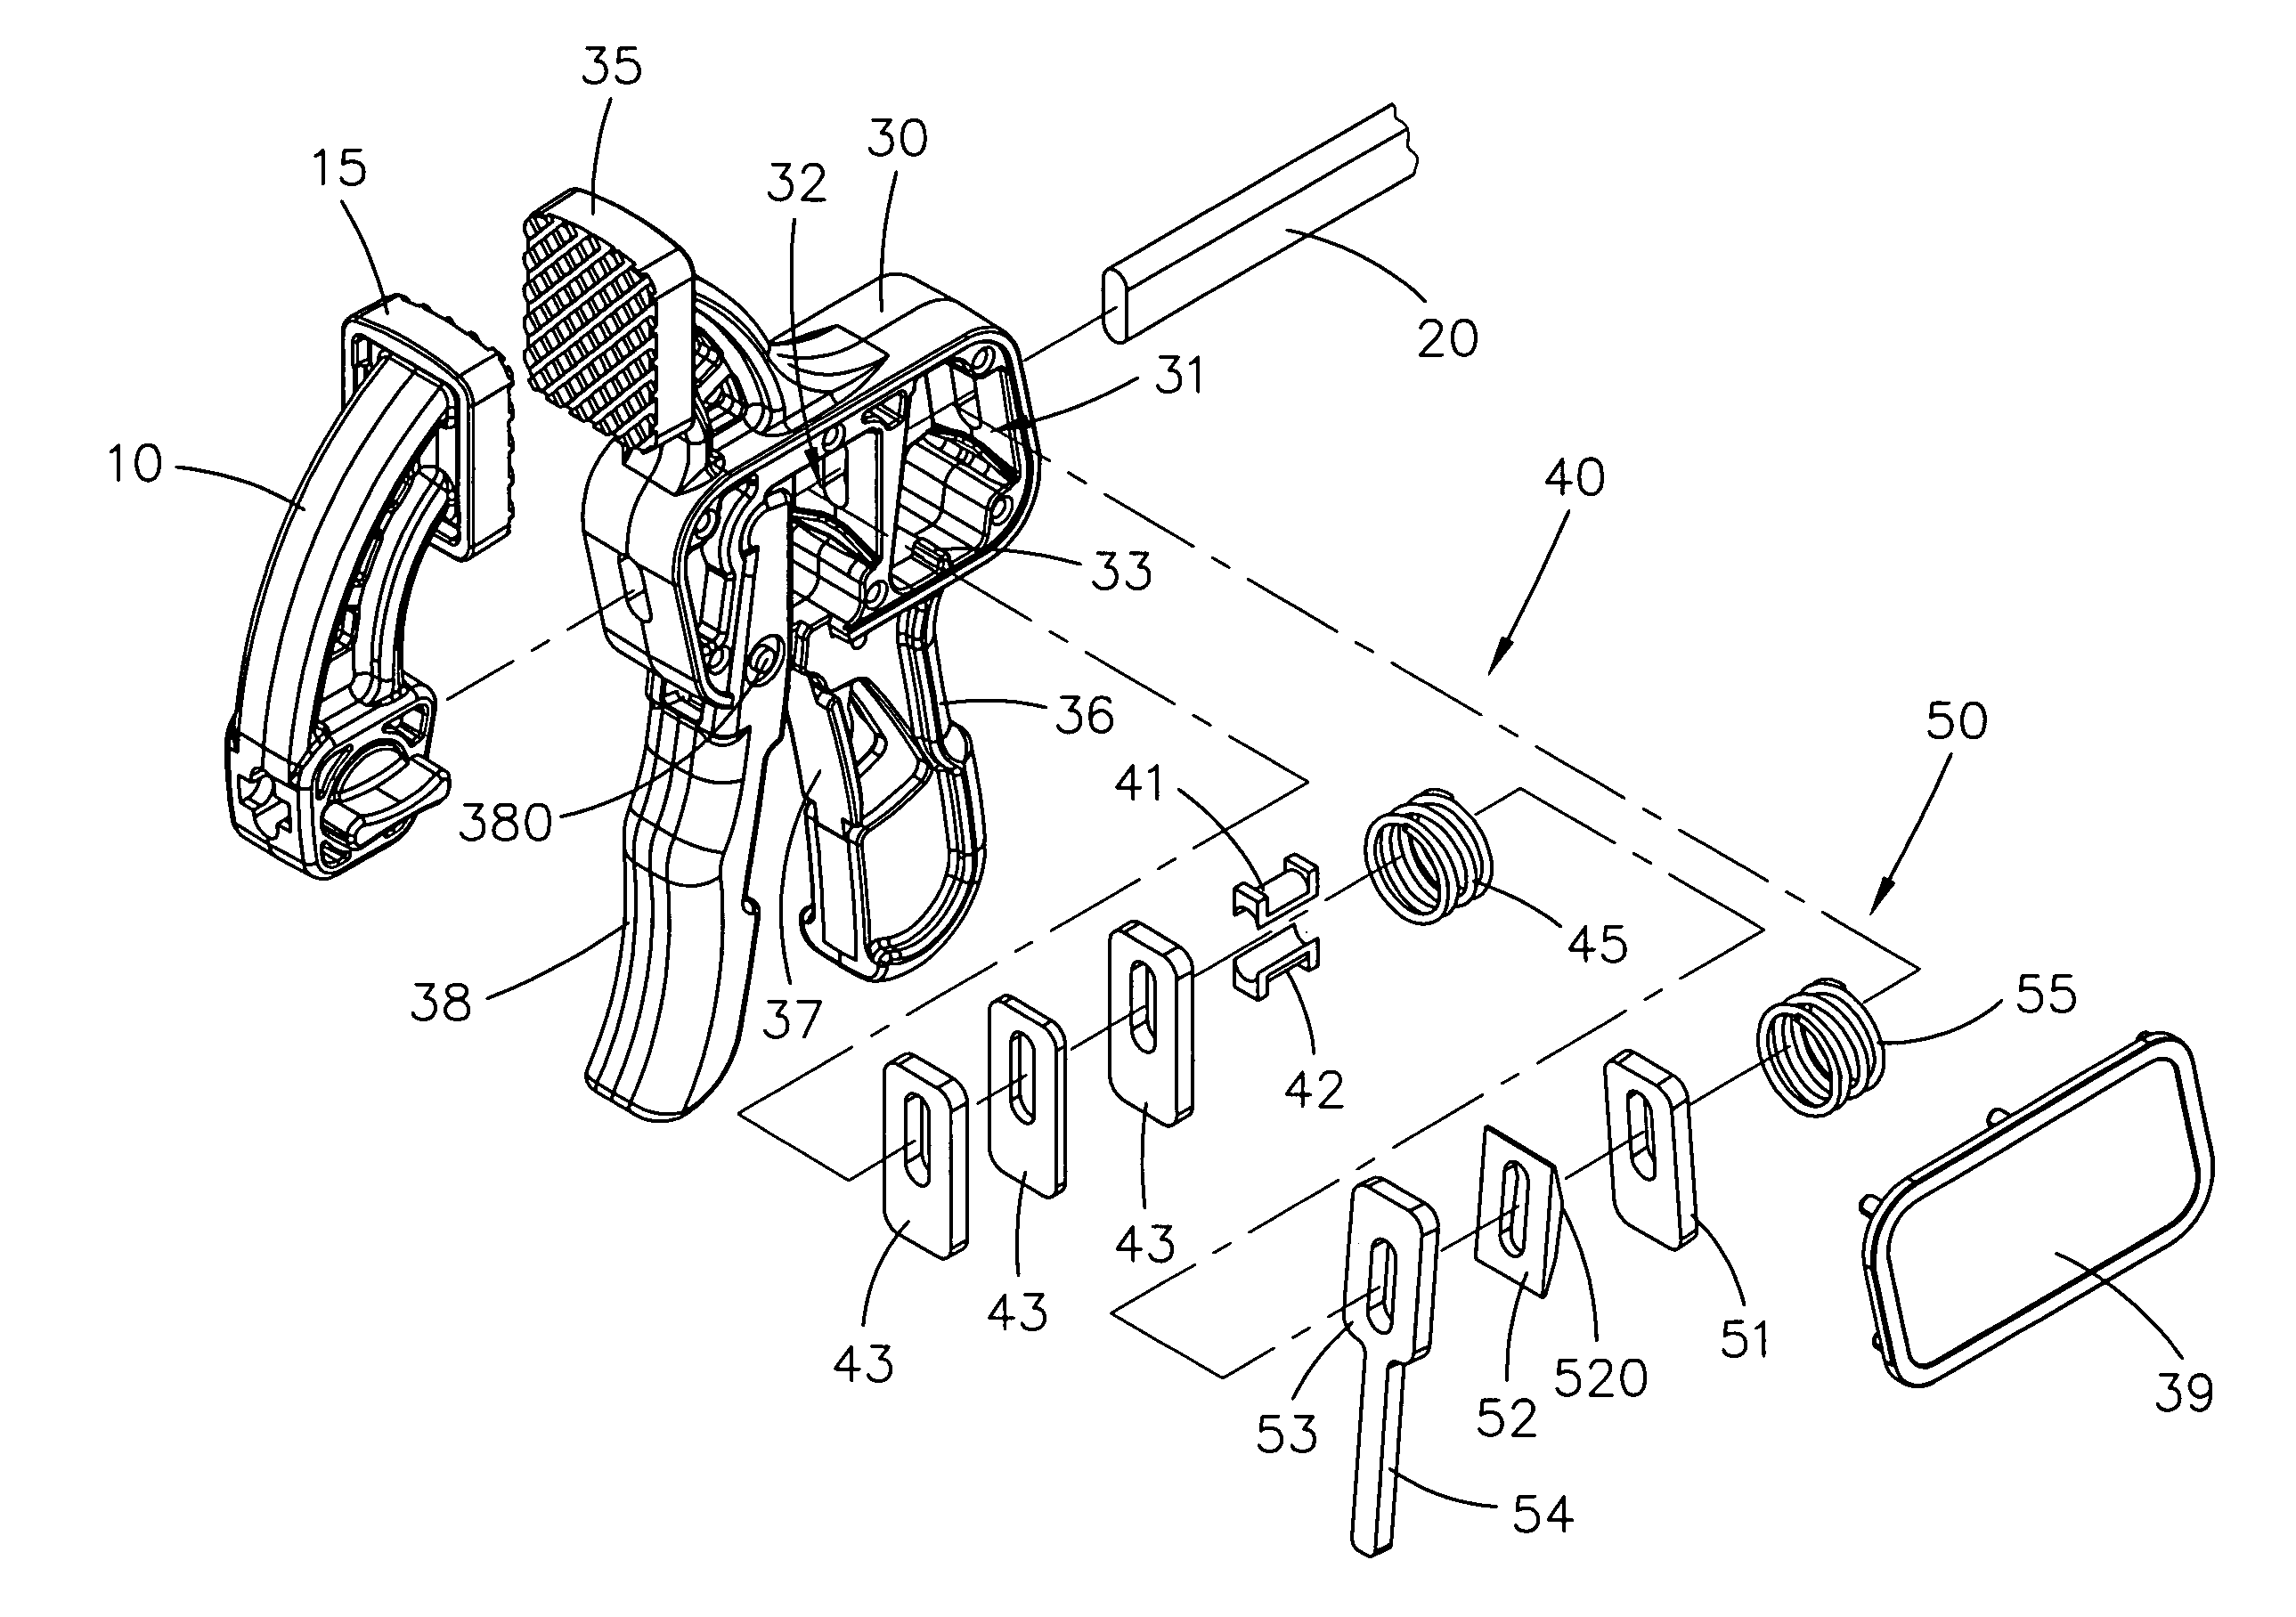 Vise clamp